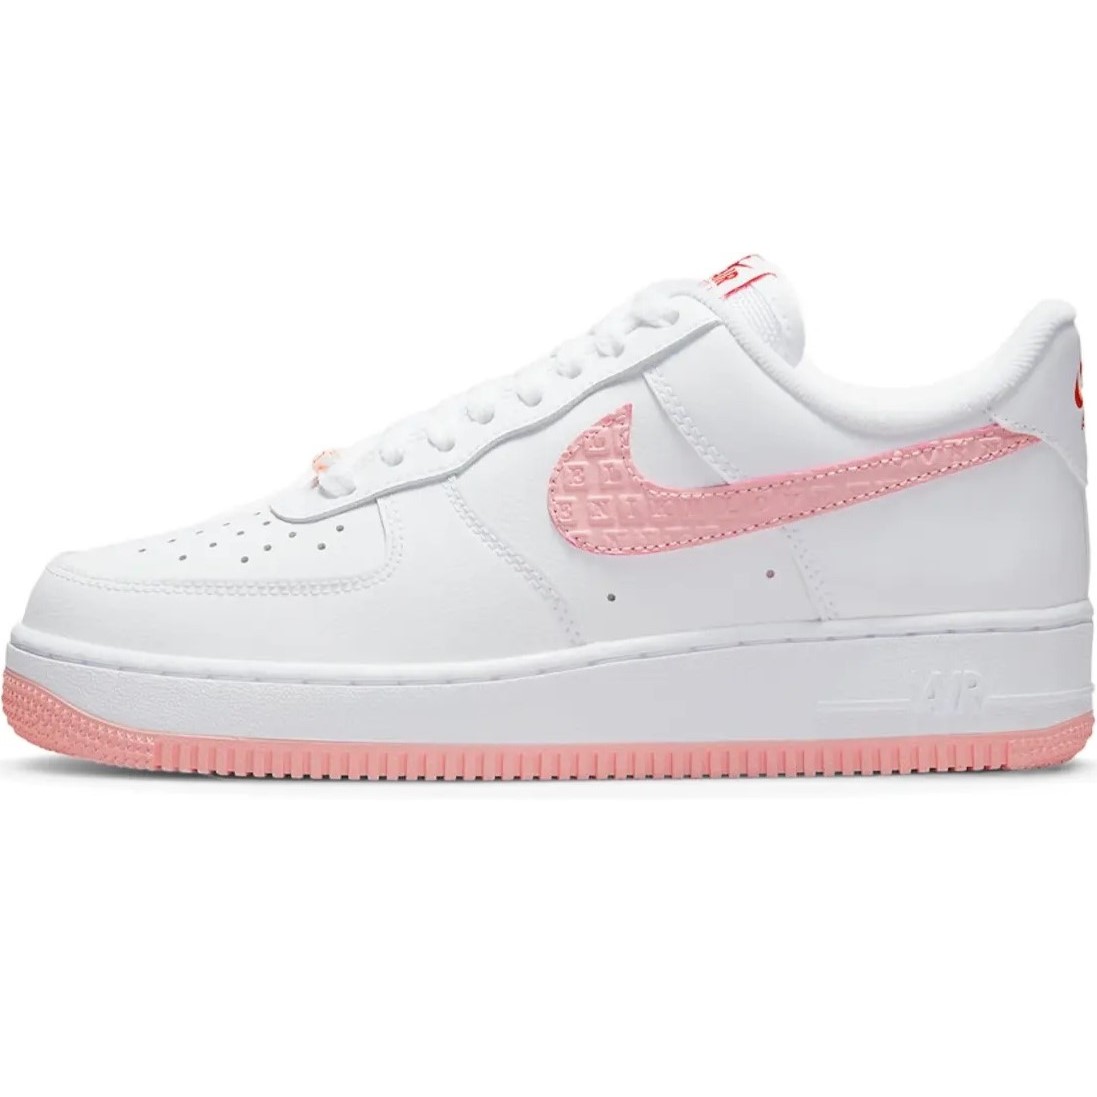 GIÀY THỂ THAO NỮ NIKE AIR FORCE 1 07 LOW VD VALENTINE´S DAY WHITE ATMOSPHERE UNIVERSITY RED SAIL DQ9320-100 9